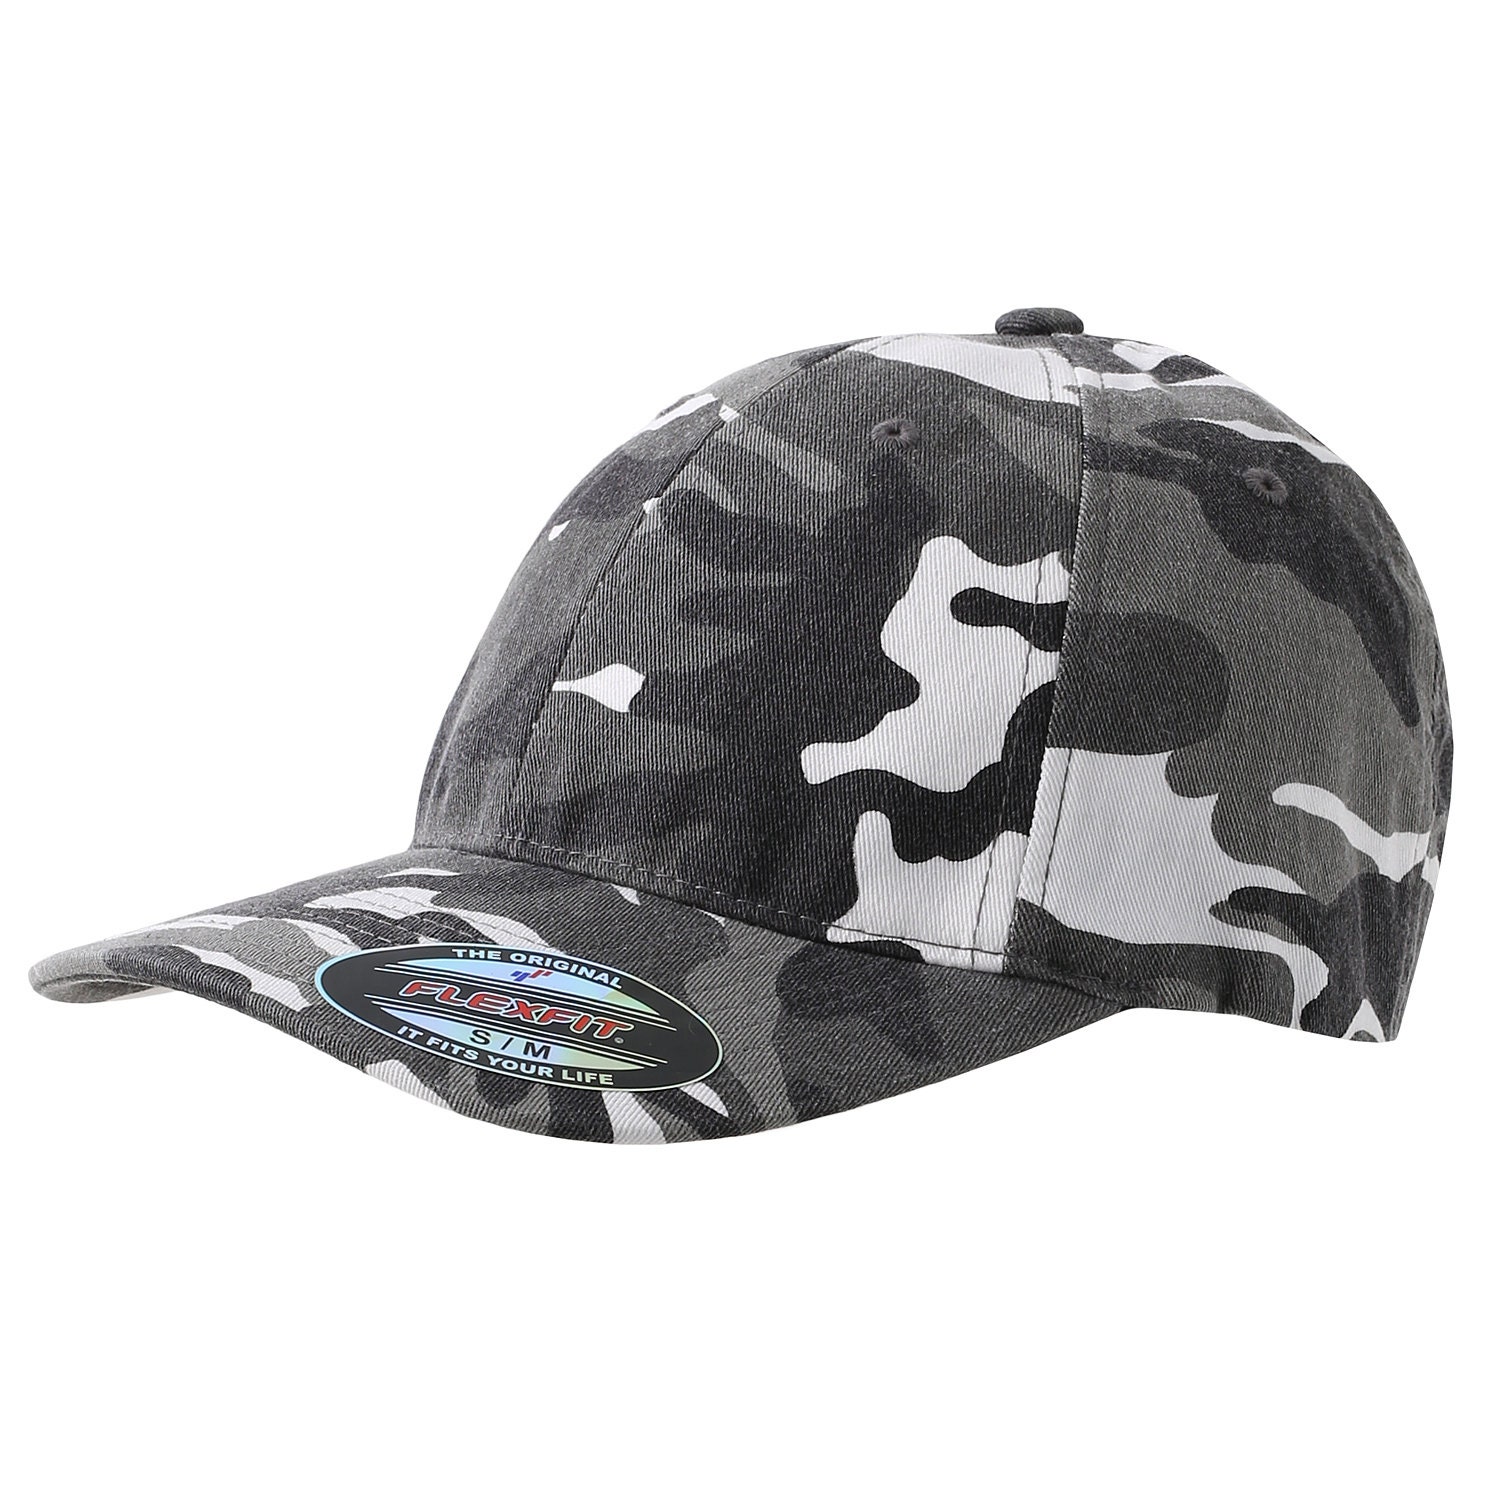 Embroidered Camo Flex-fit Personalized Flex-fit Custom Embroidery, - Hat With Fitted Hat, Custom Etsy Baseball Cap Camouflage